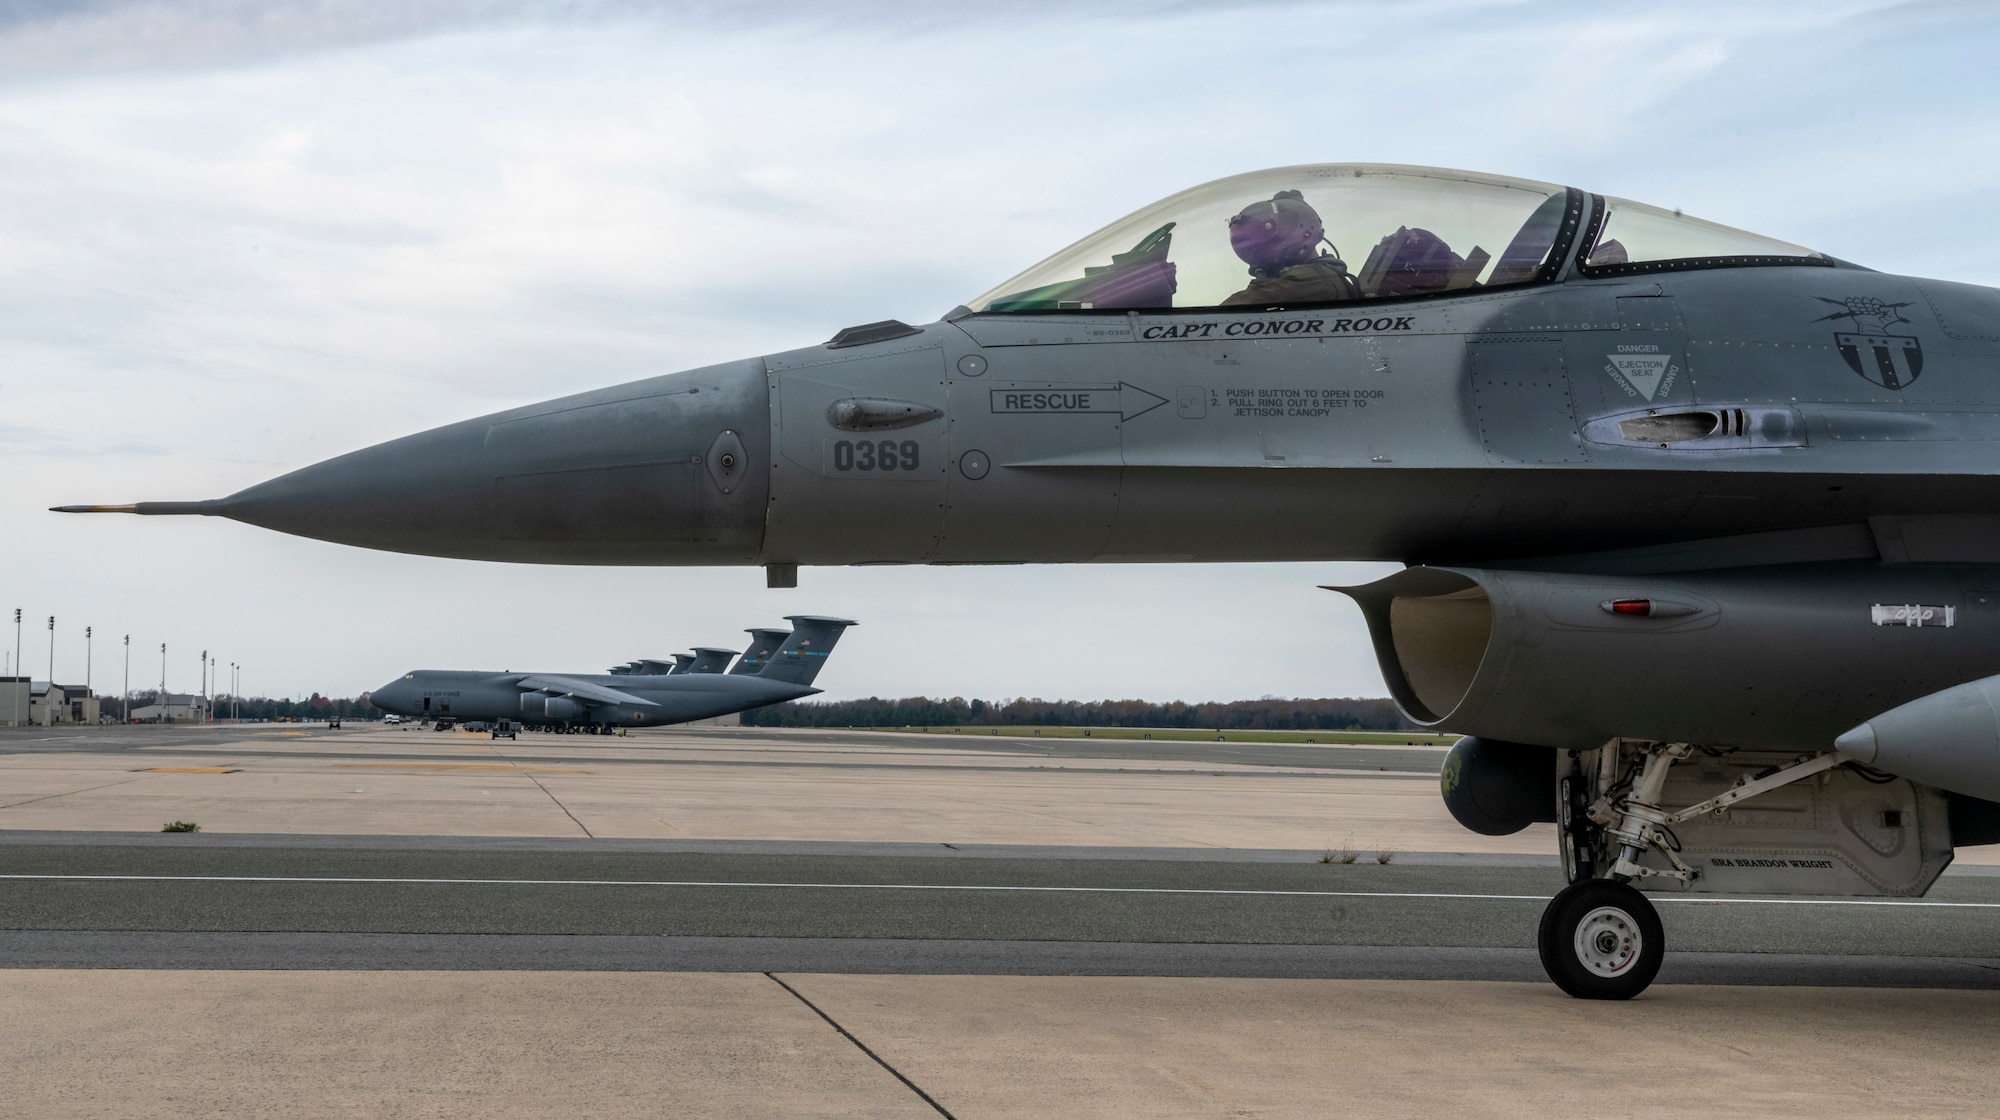 An F-16 Fighting Falcon, assigned to the 121st Fighter Squadron at Joint Base Andrews, Maryland, prepares for takeoff at Dover Air Force Base, Delaware, Nov. 25, 2020. The aircraft stopped at Dover Air Force Base during routine flight training operations. The base prioritizes providing unrivaled installation support for mission partners, transit aircraft and neighboring installations. (U.S. Air Force photo by Senior Airman Christopher Quail)